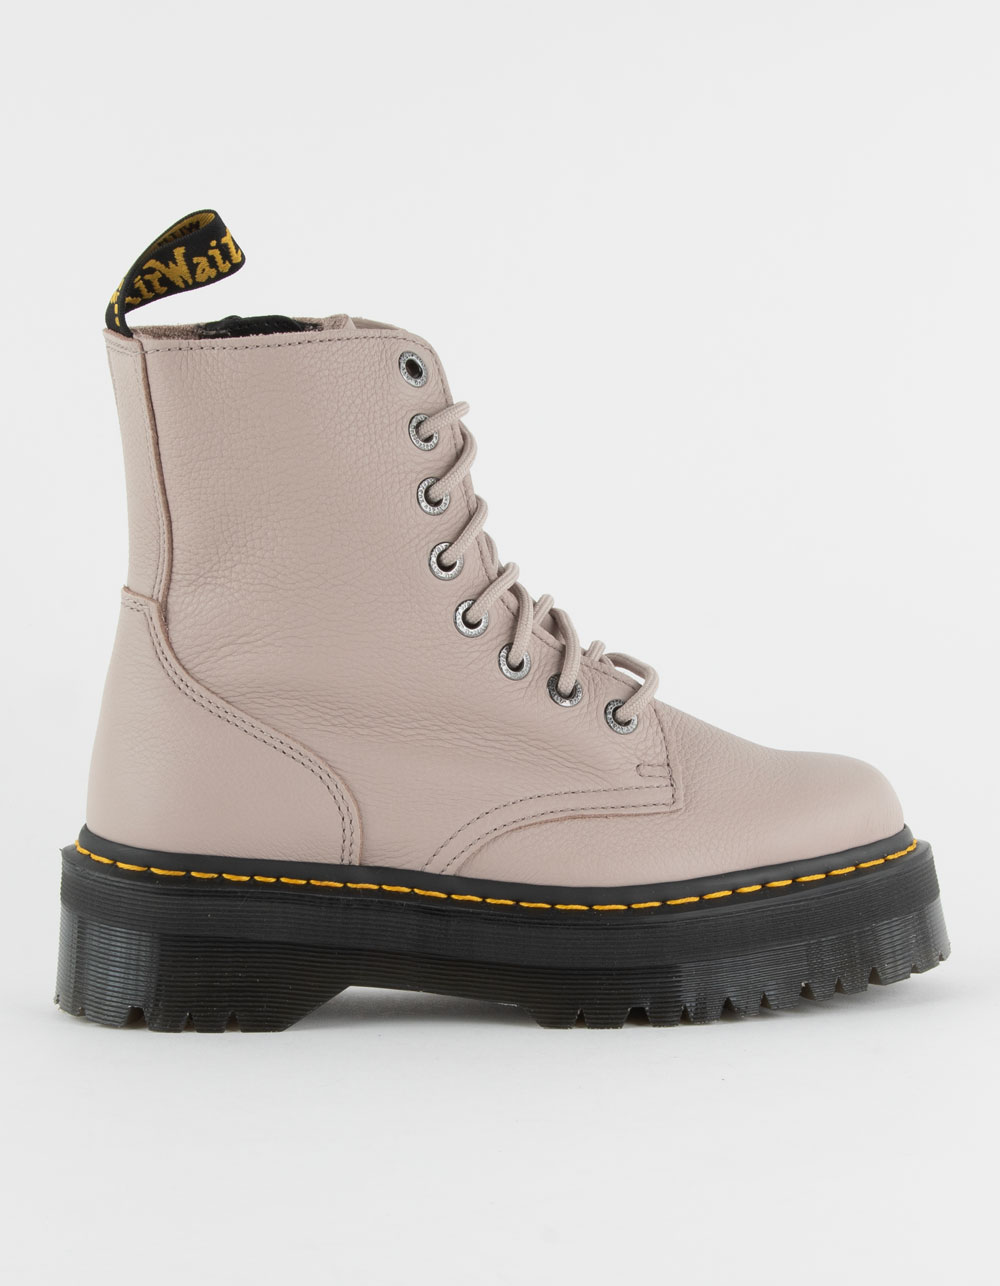 DR. MARTENS Jadon III Lace Up Womens Boots - TAUPE | Tillys